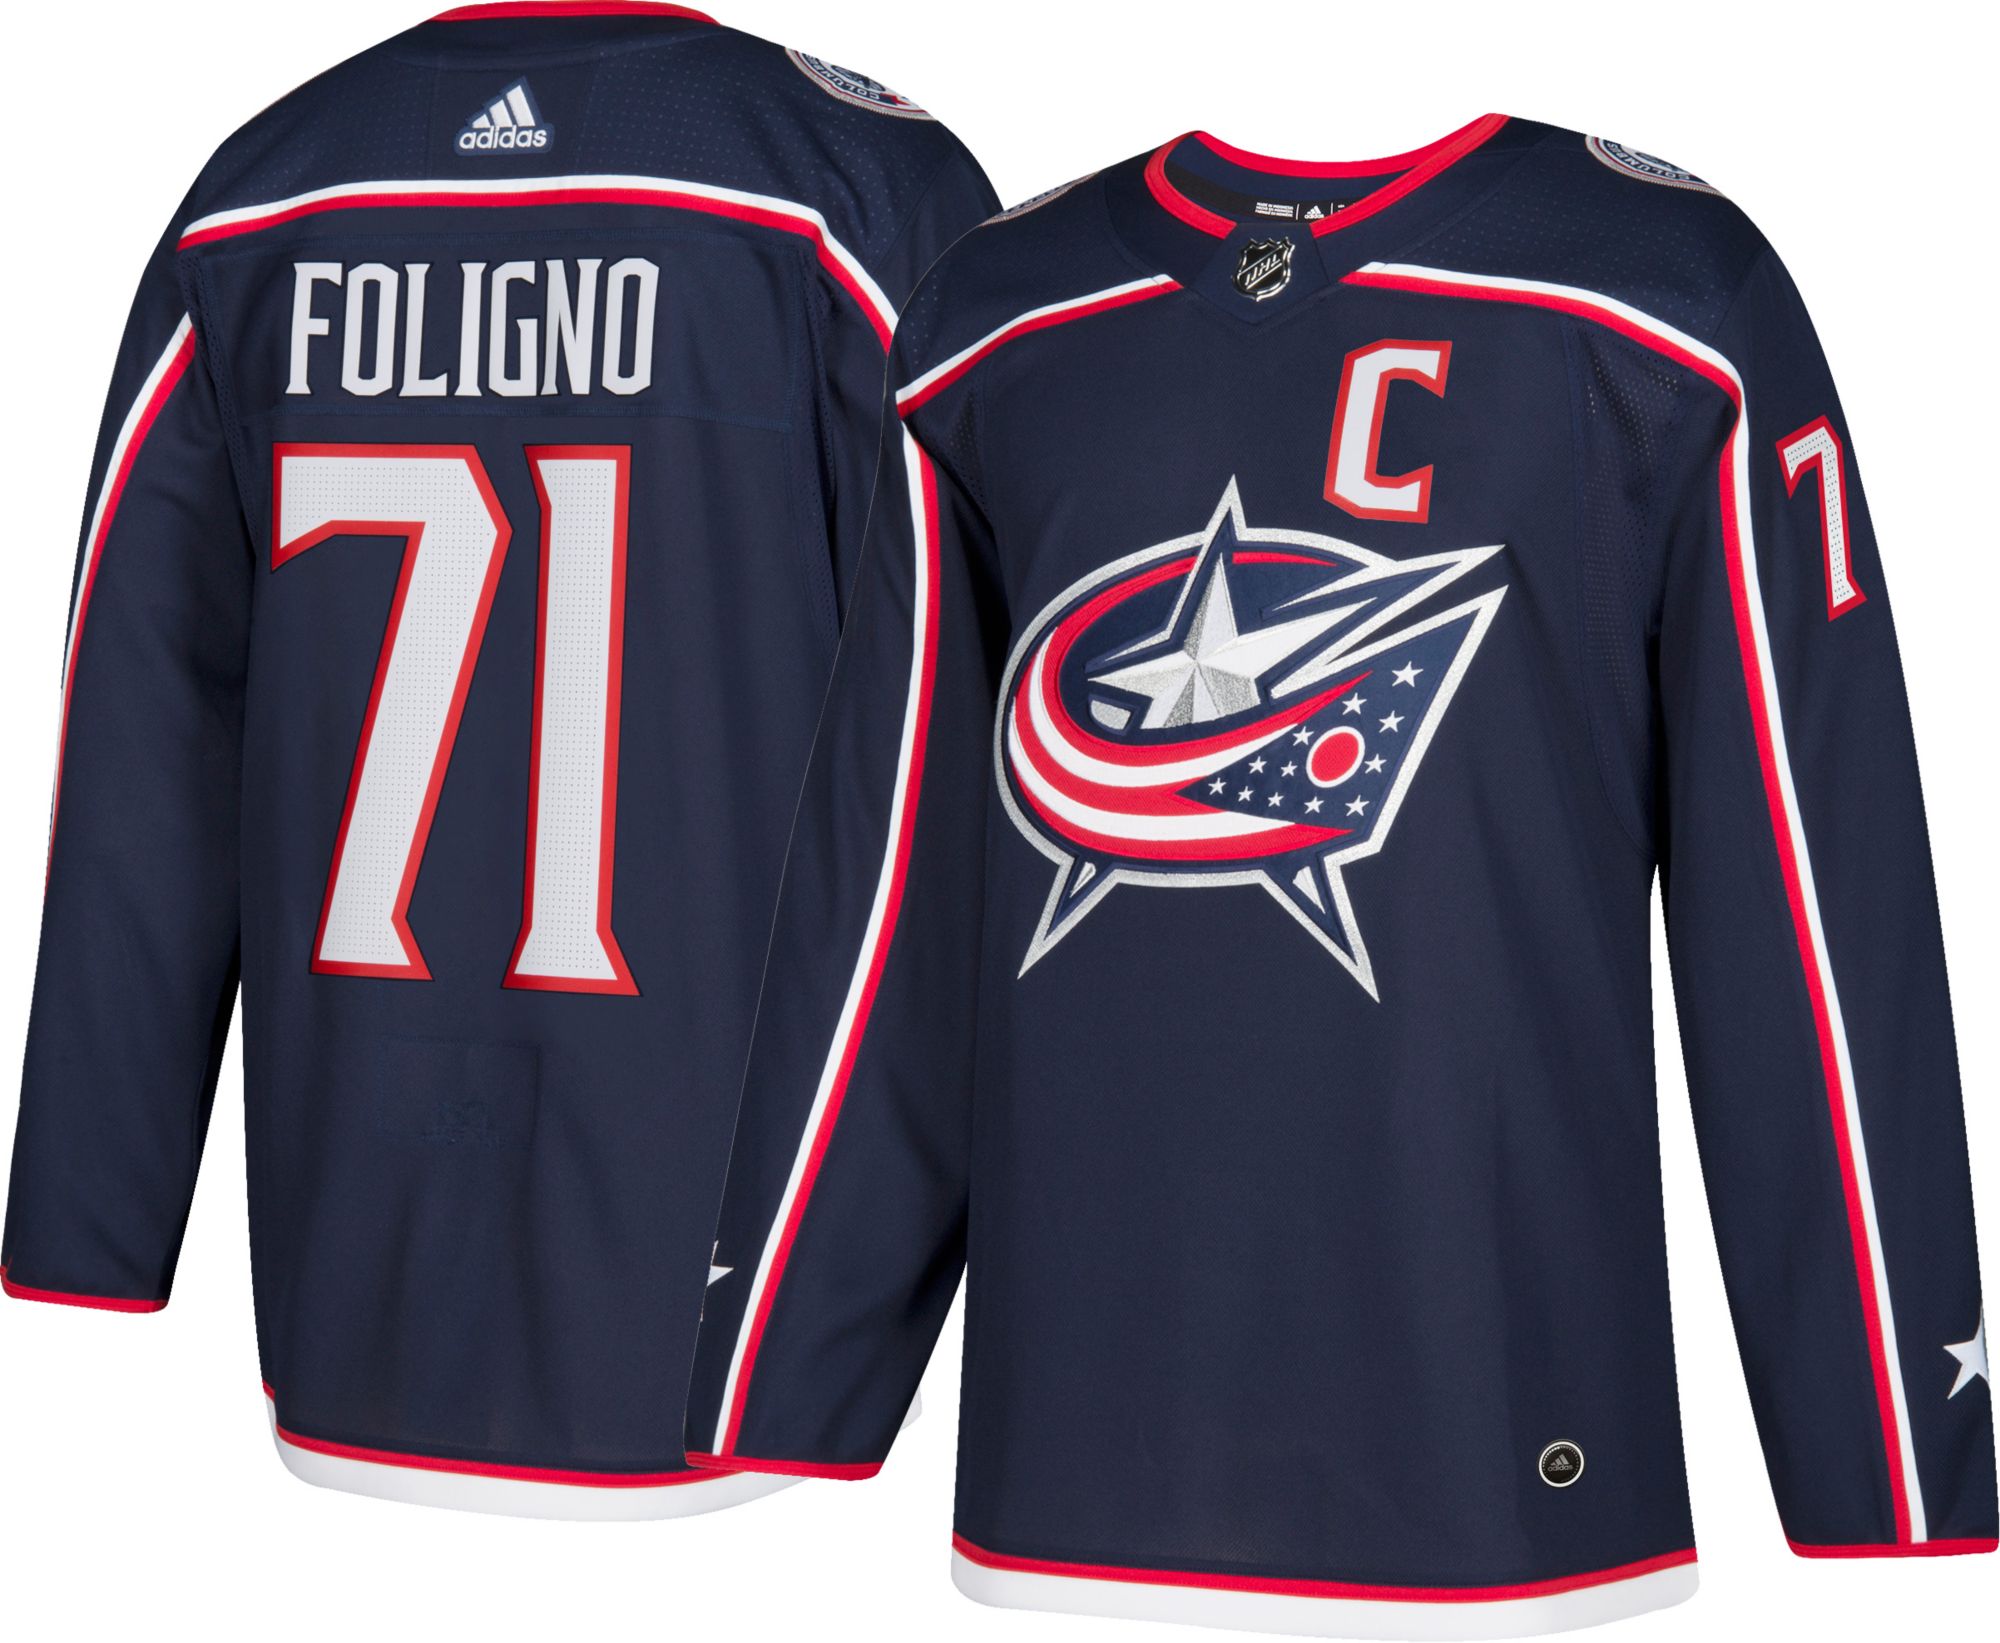 for columbus jersey